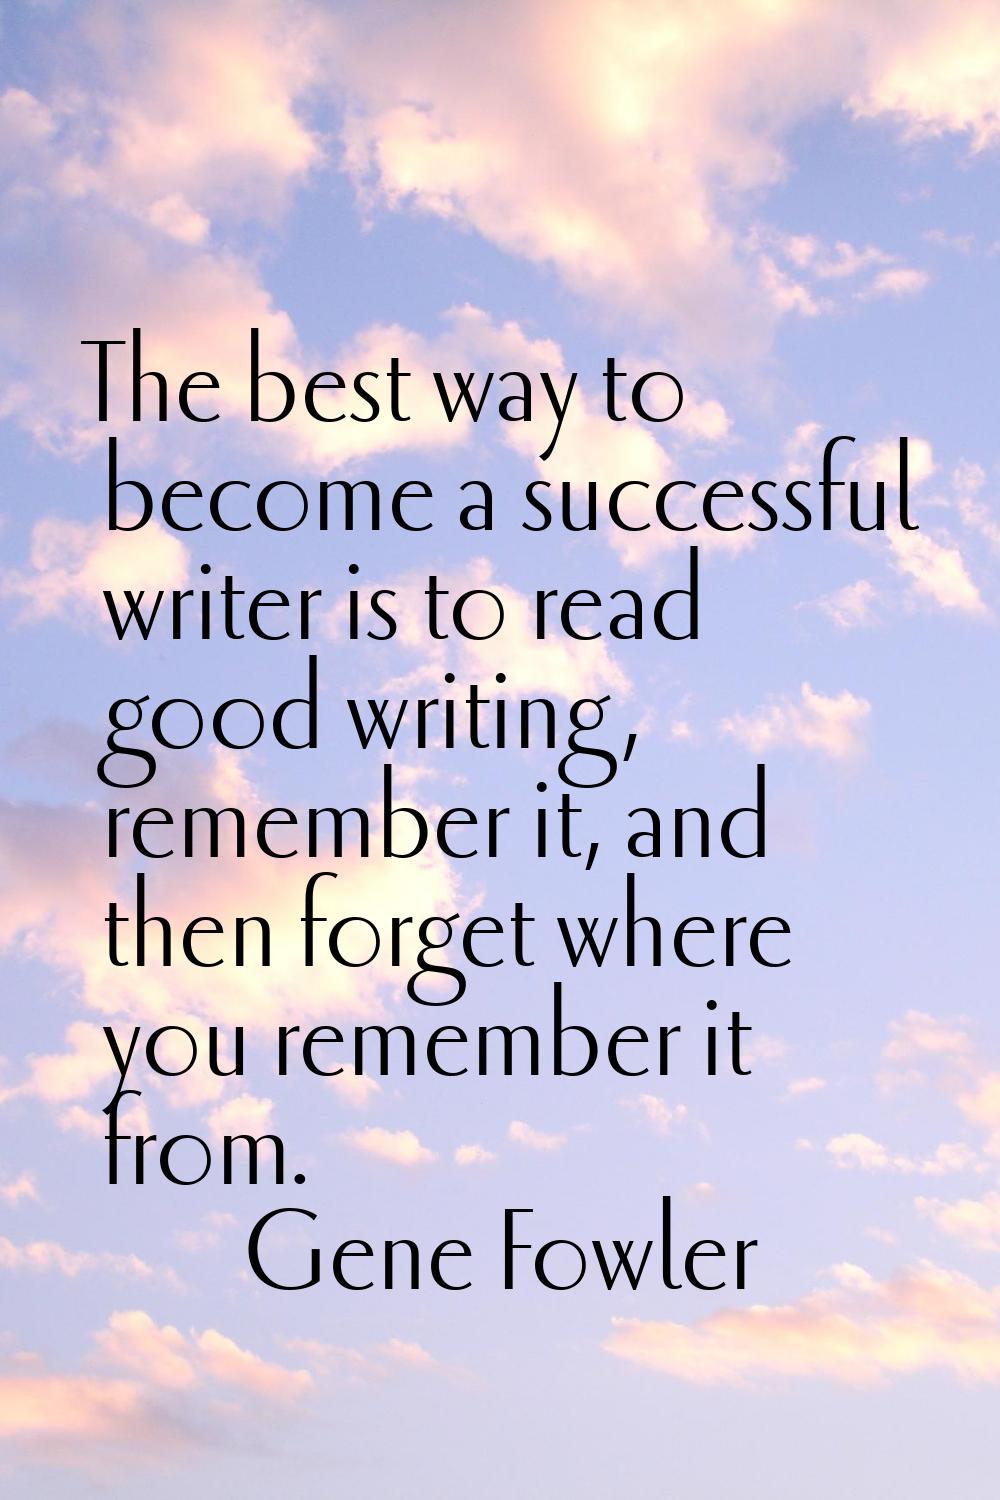 The best way to become a successful writer is to read good writing, remember it, and then forget wh